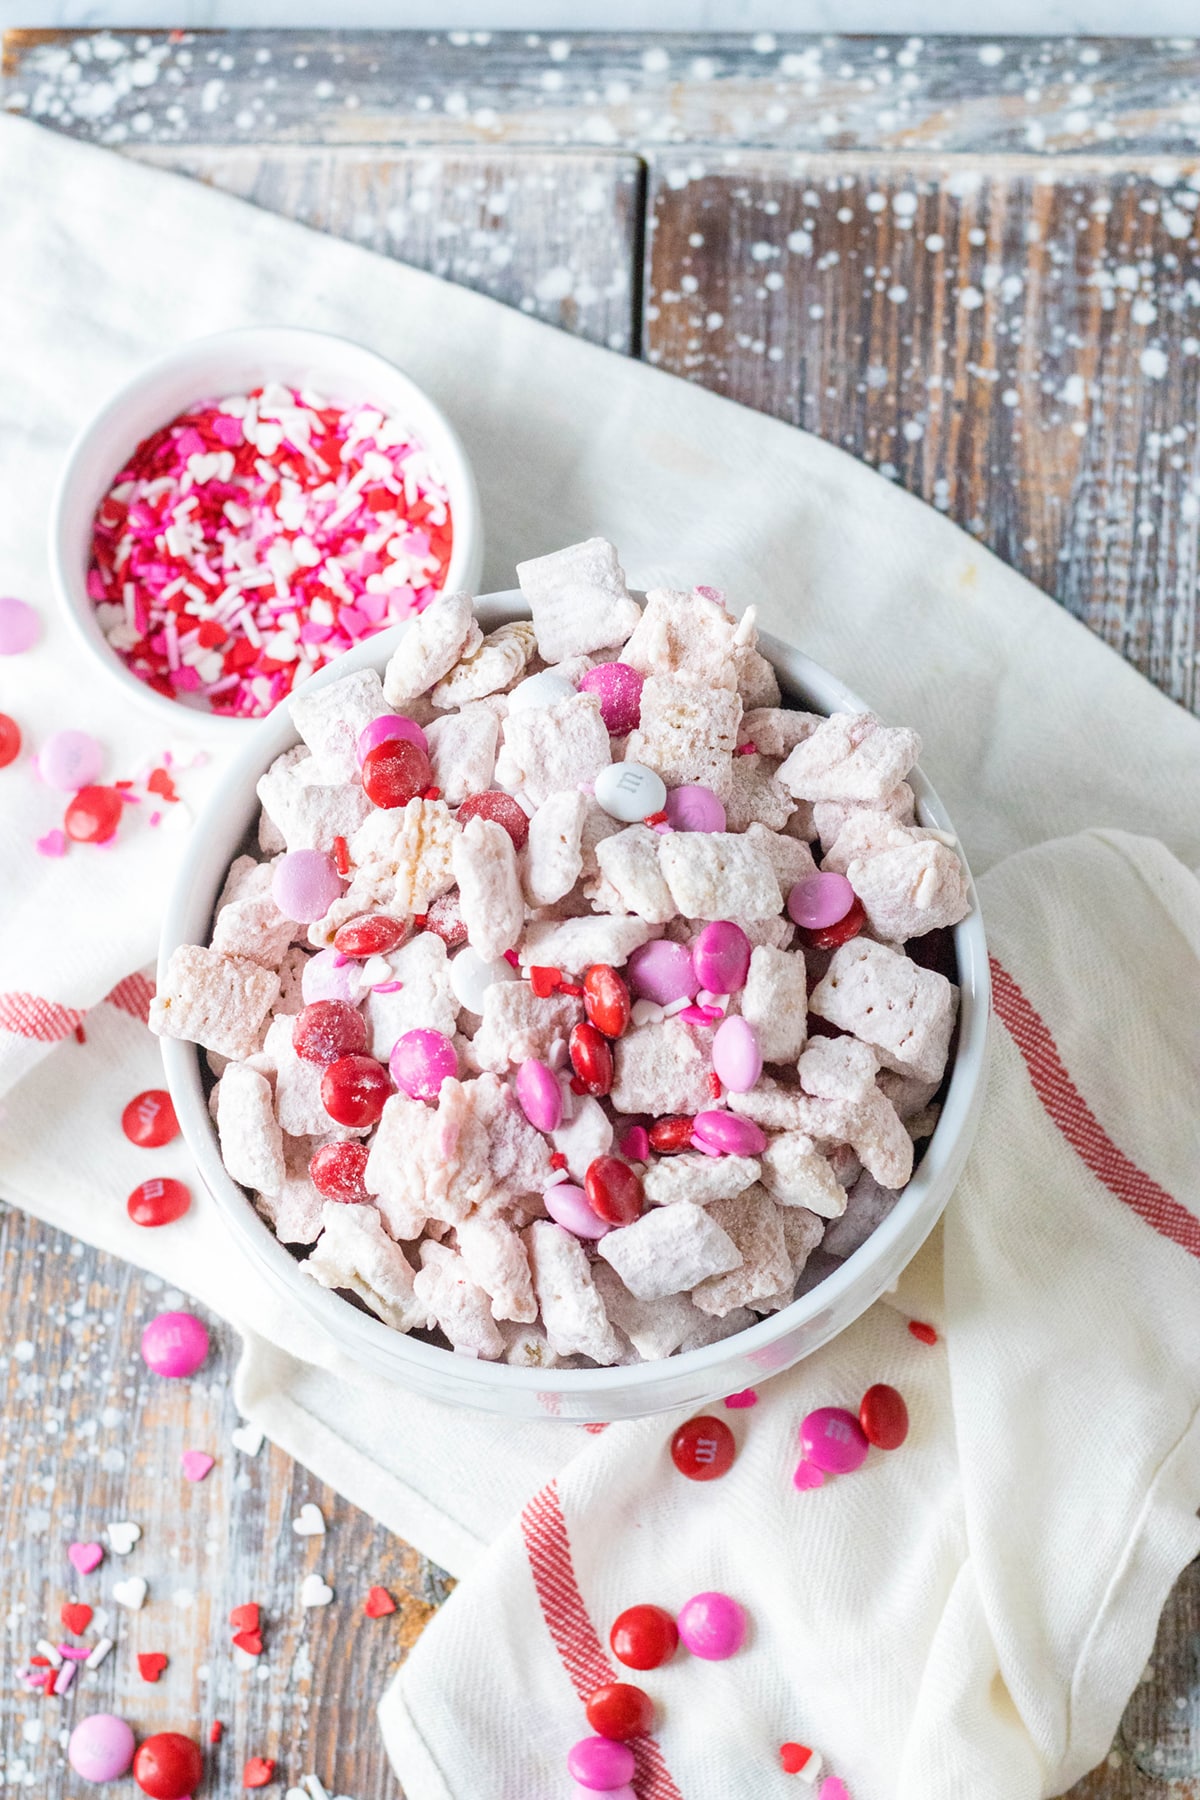 Plated strawberry puppy chow with toppings all over the table